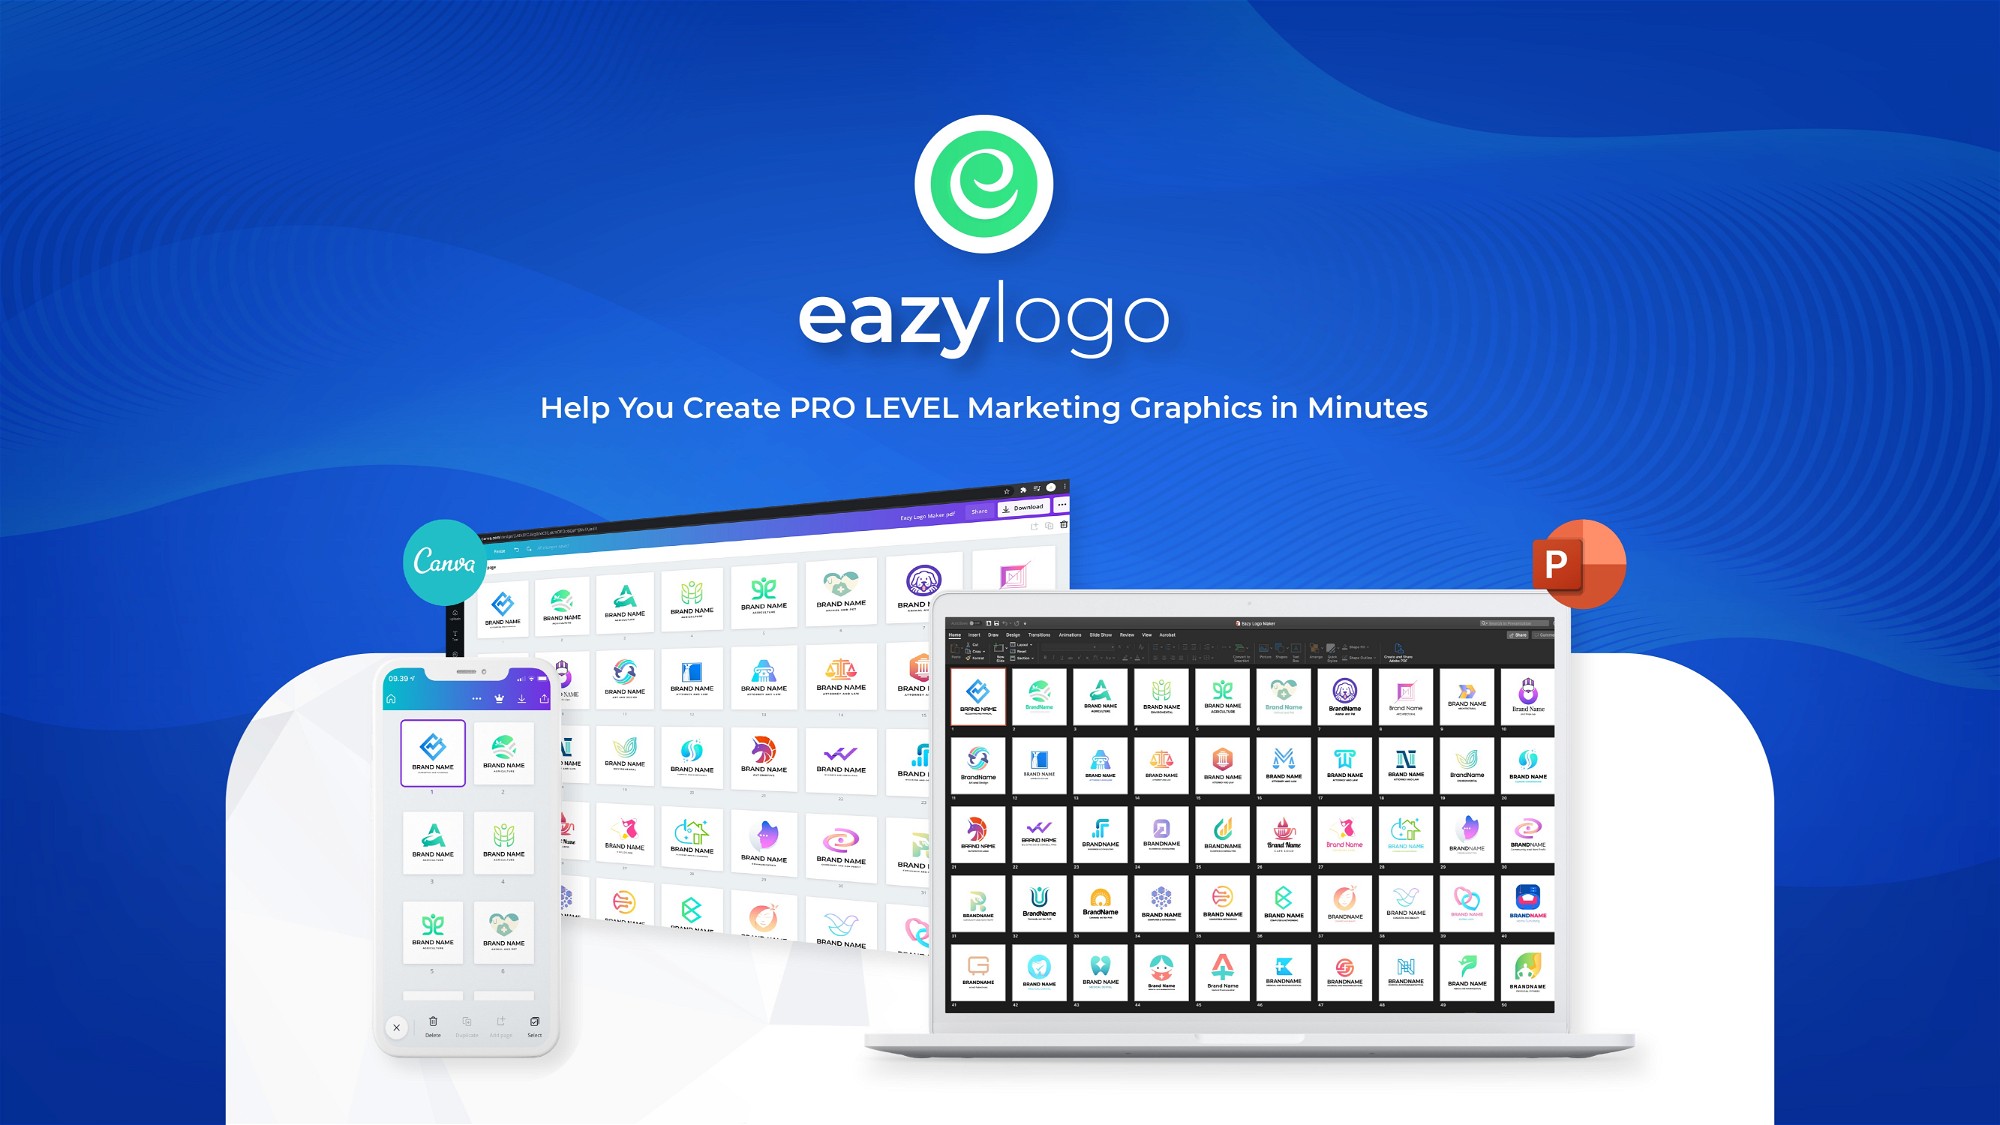 EazyLogo Lifetime Deal-Pay Once And Never Again